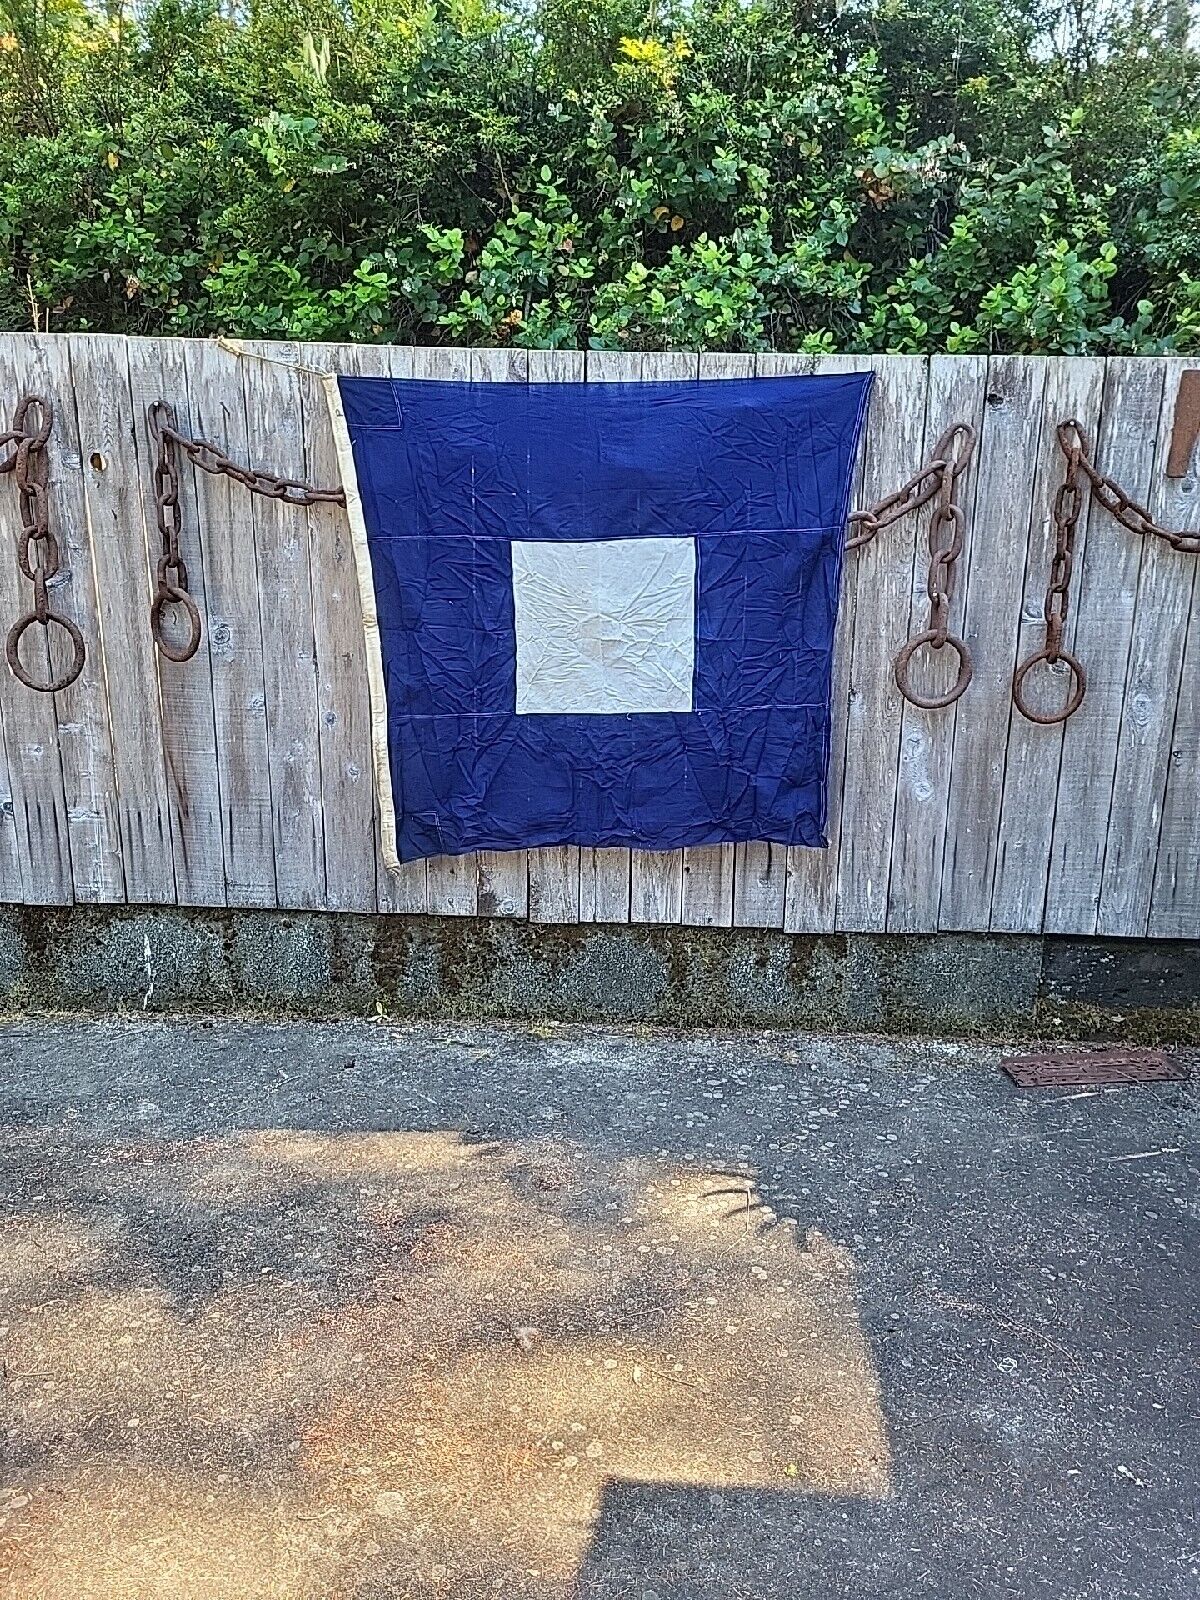  US NAVY SIGNAL FLAG WW2 SHIP Measures Approx 55 X 48  \